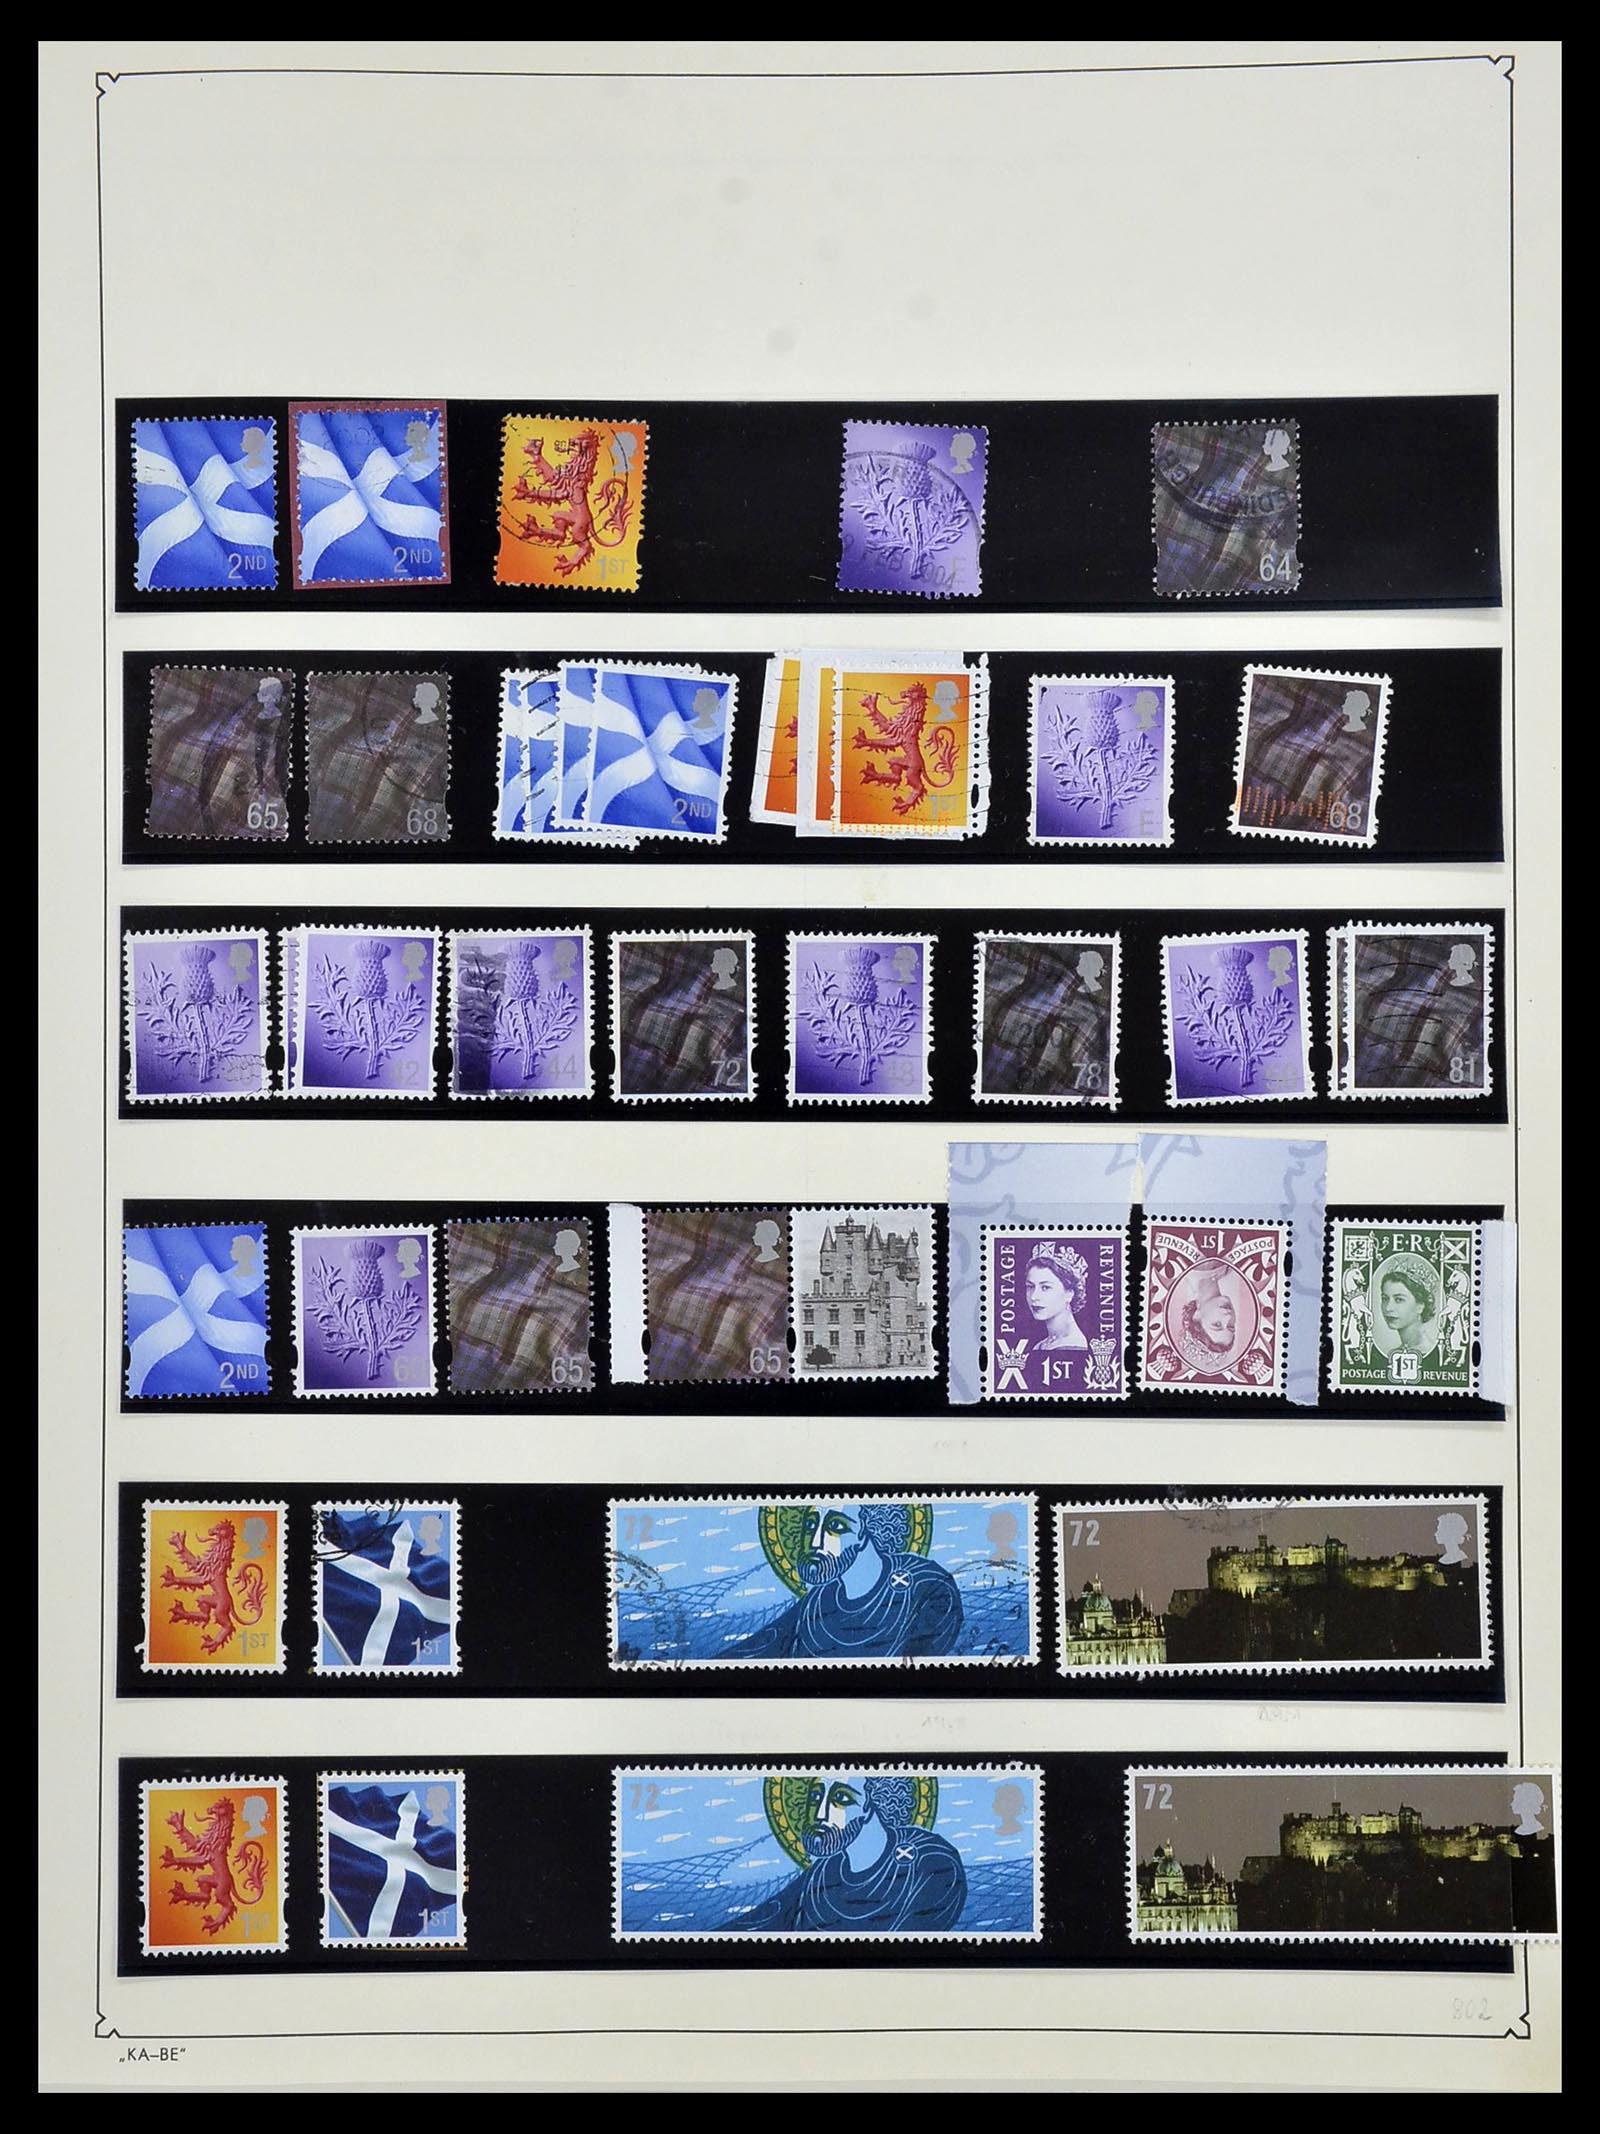 34221 020 - Stamp collection 34221 Great Britain Machins/castles 1971-2005.